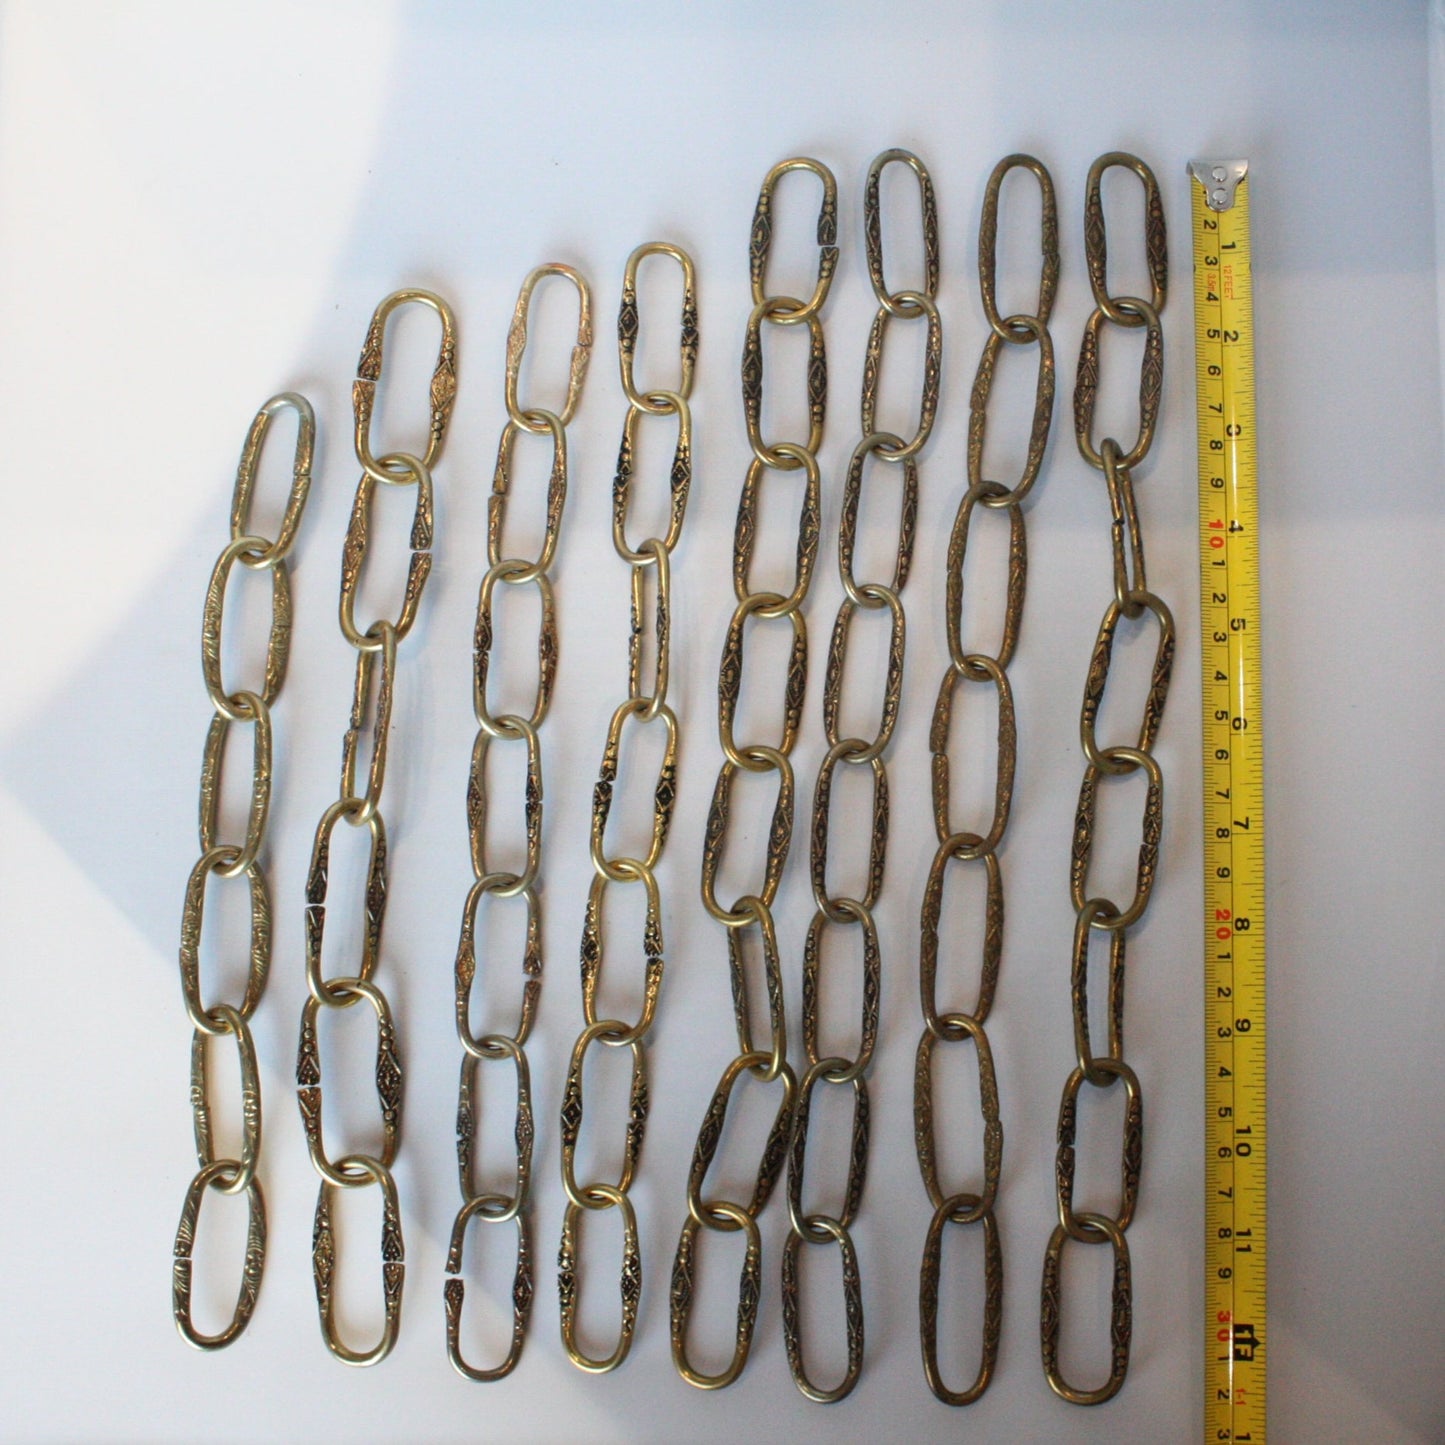 Box of Patterned Brass Plated Spanish Iron Chain, 13" and Under (Box of 16)